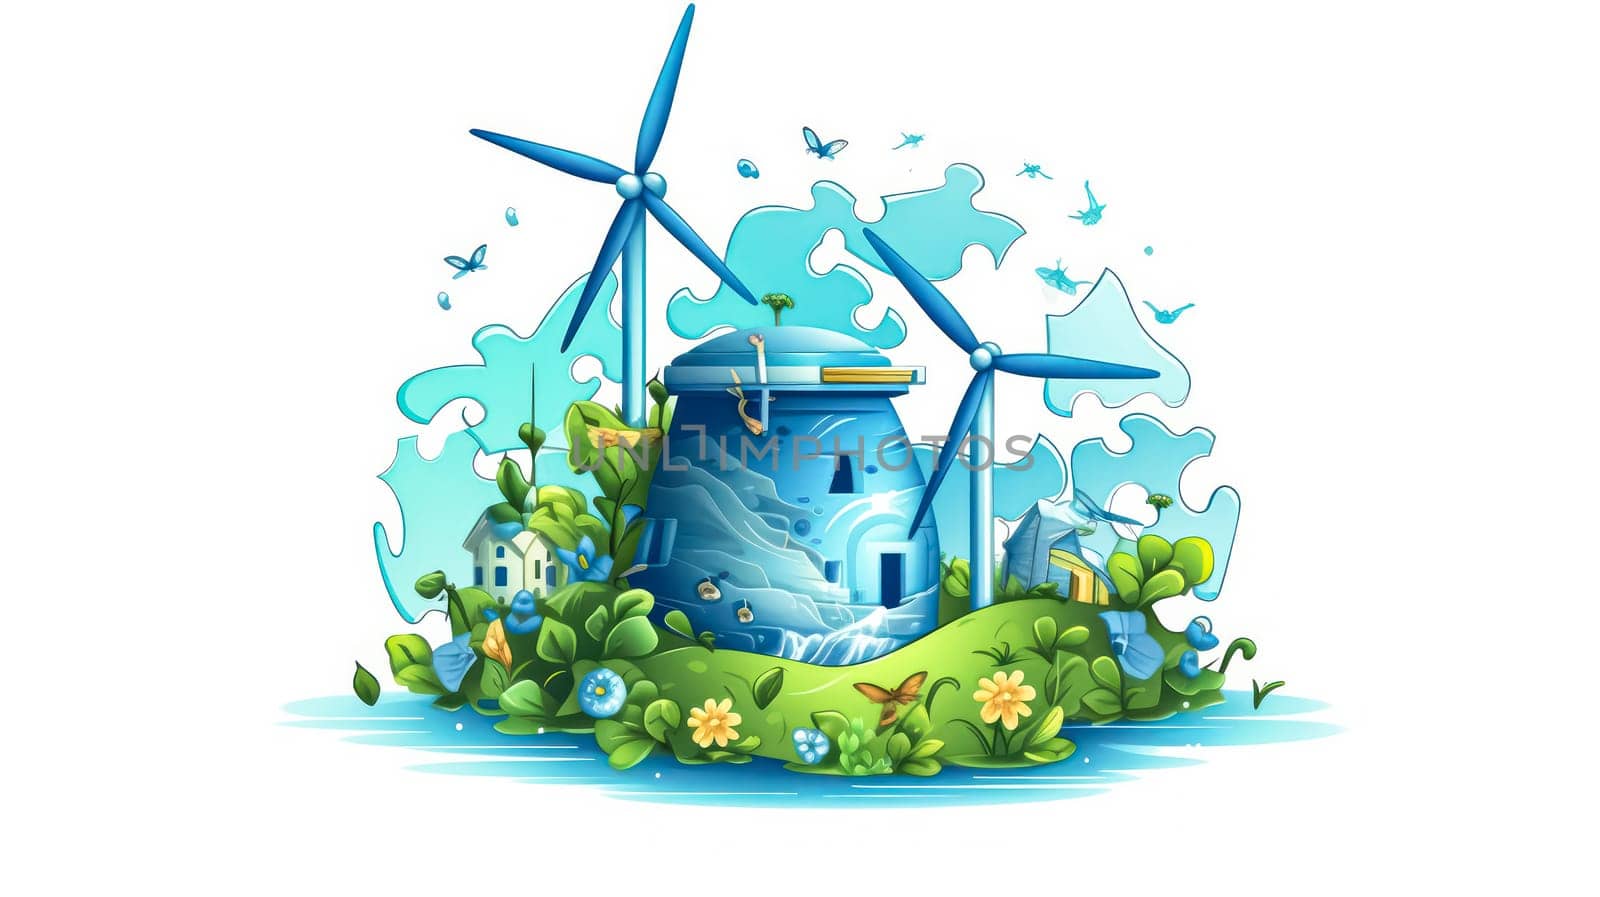 World Environment Day puzzle banner. Protect nature and ecology. Earth Day. Globe with elements of ecology. Graphic, web design, marketing, print materials. Ecology concept.